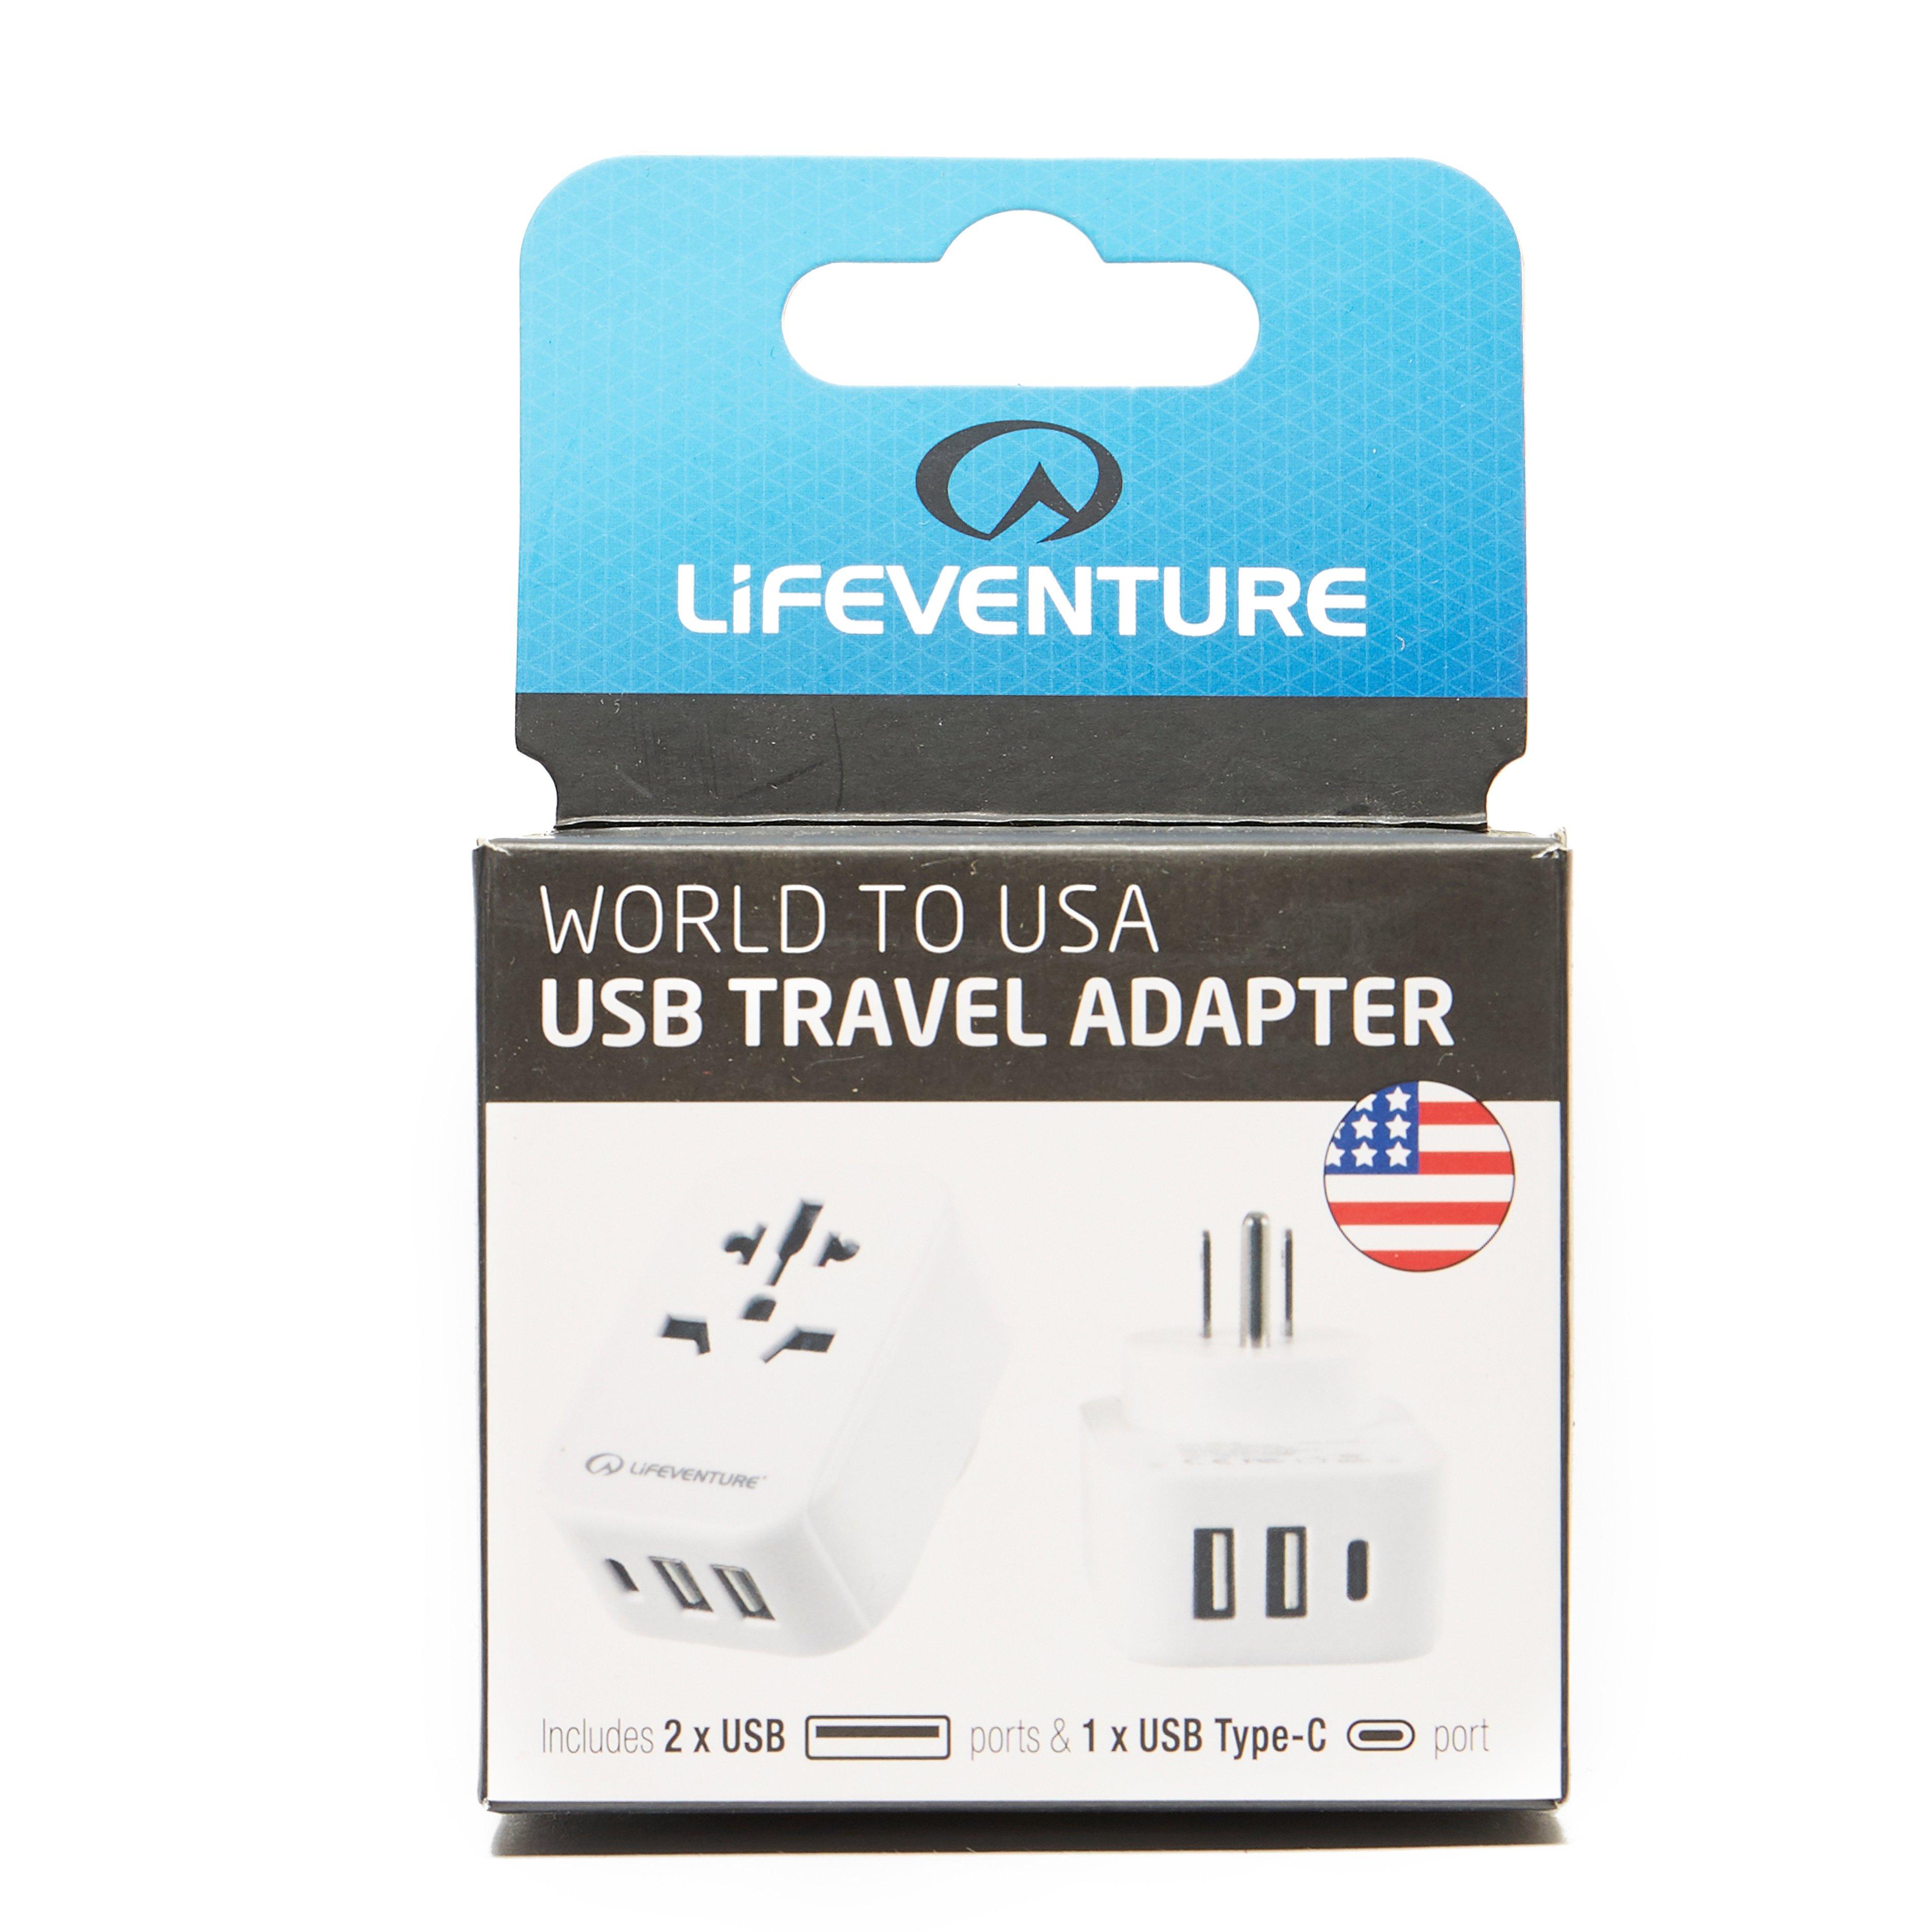 Lifeventure World to USA Adapter and USB Review